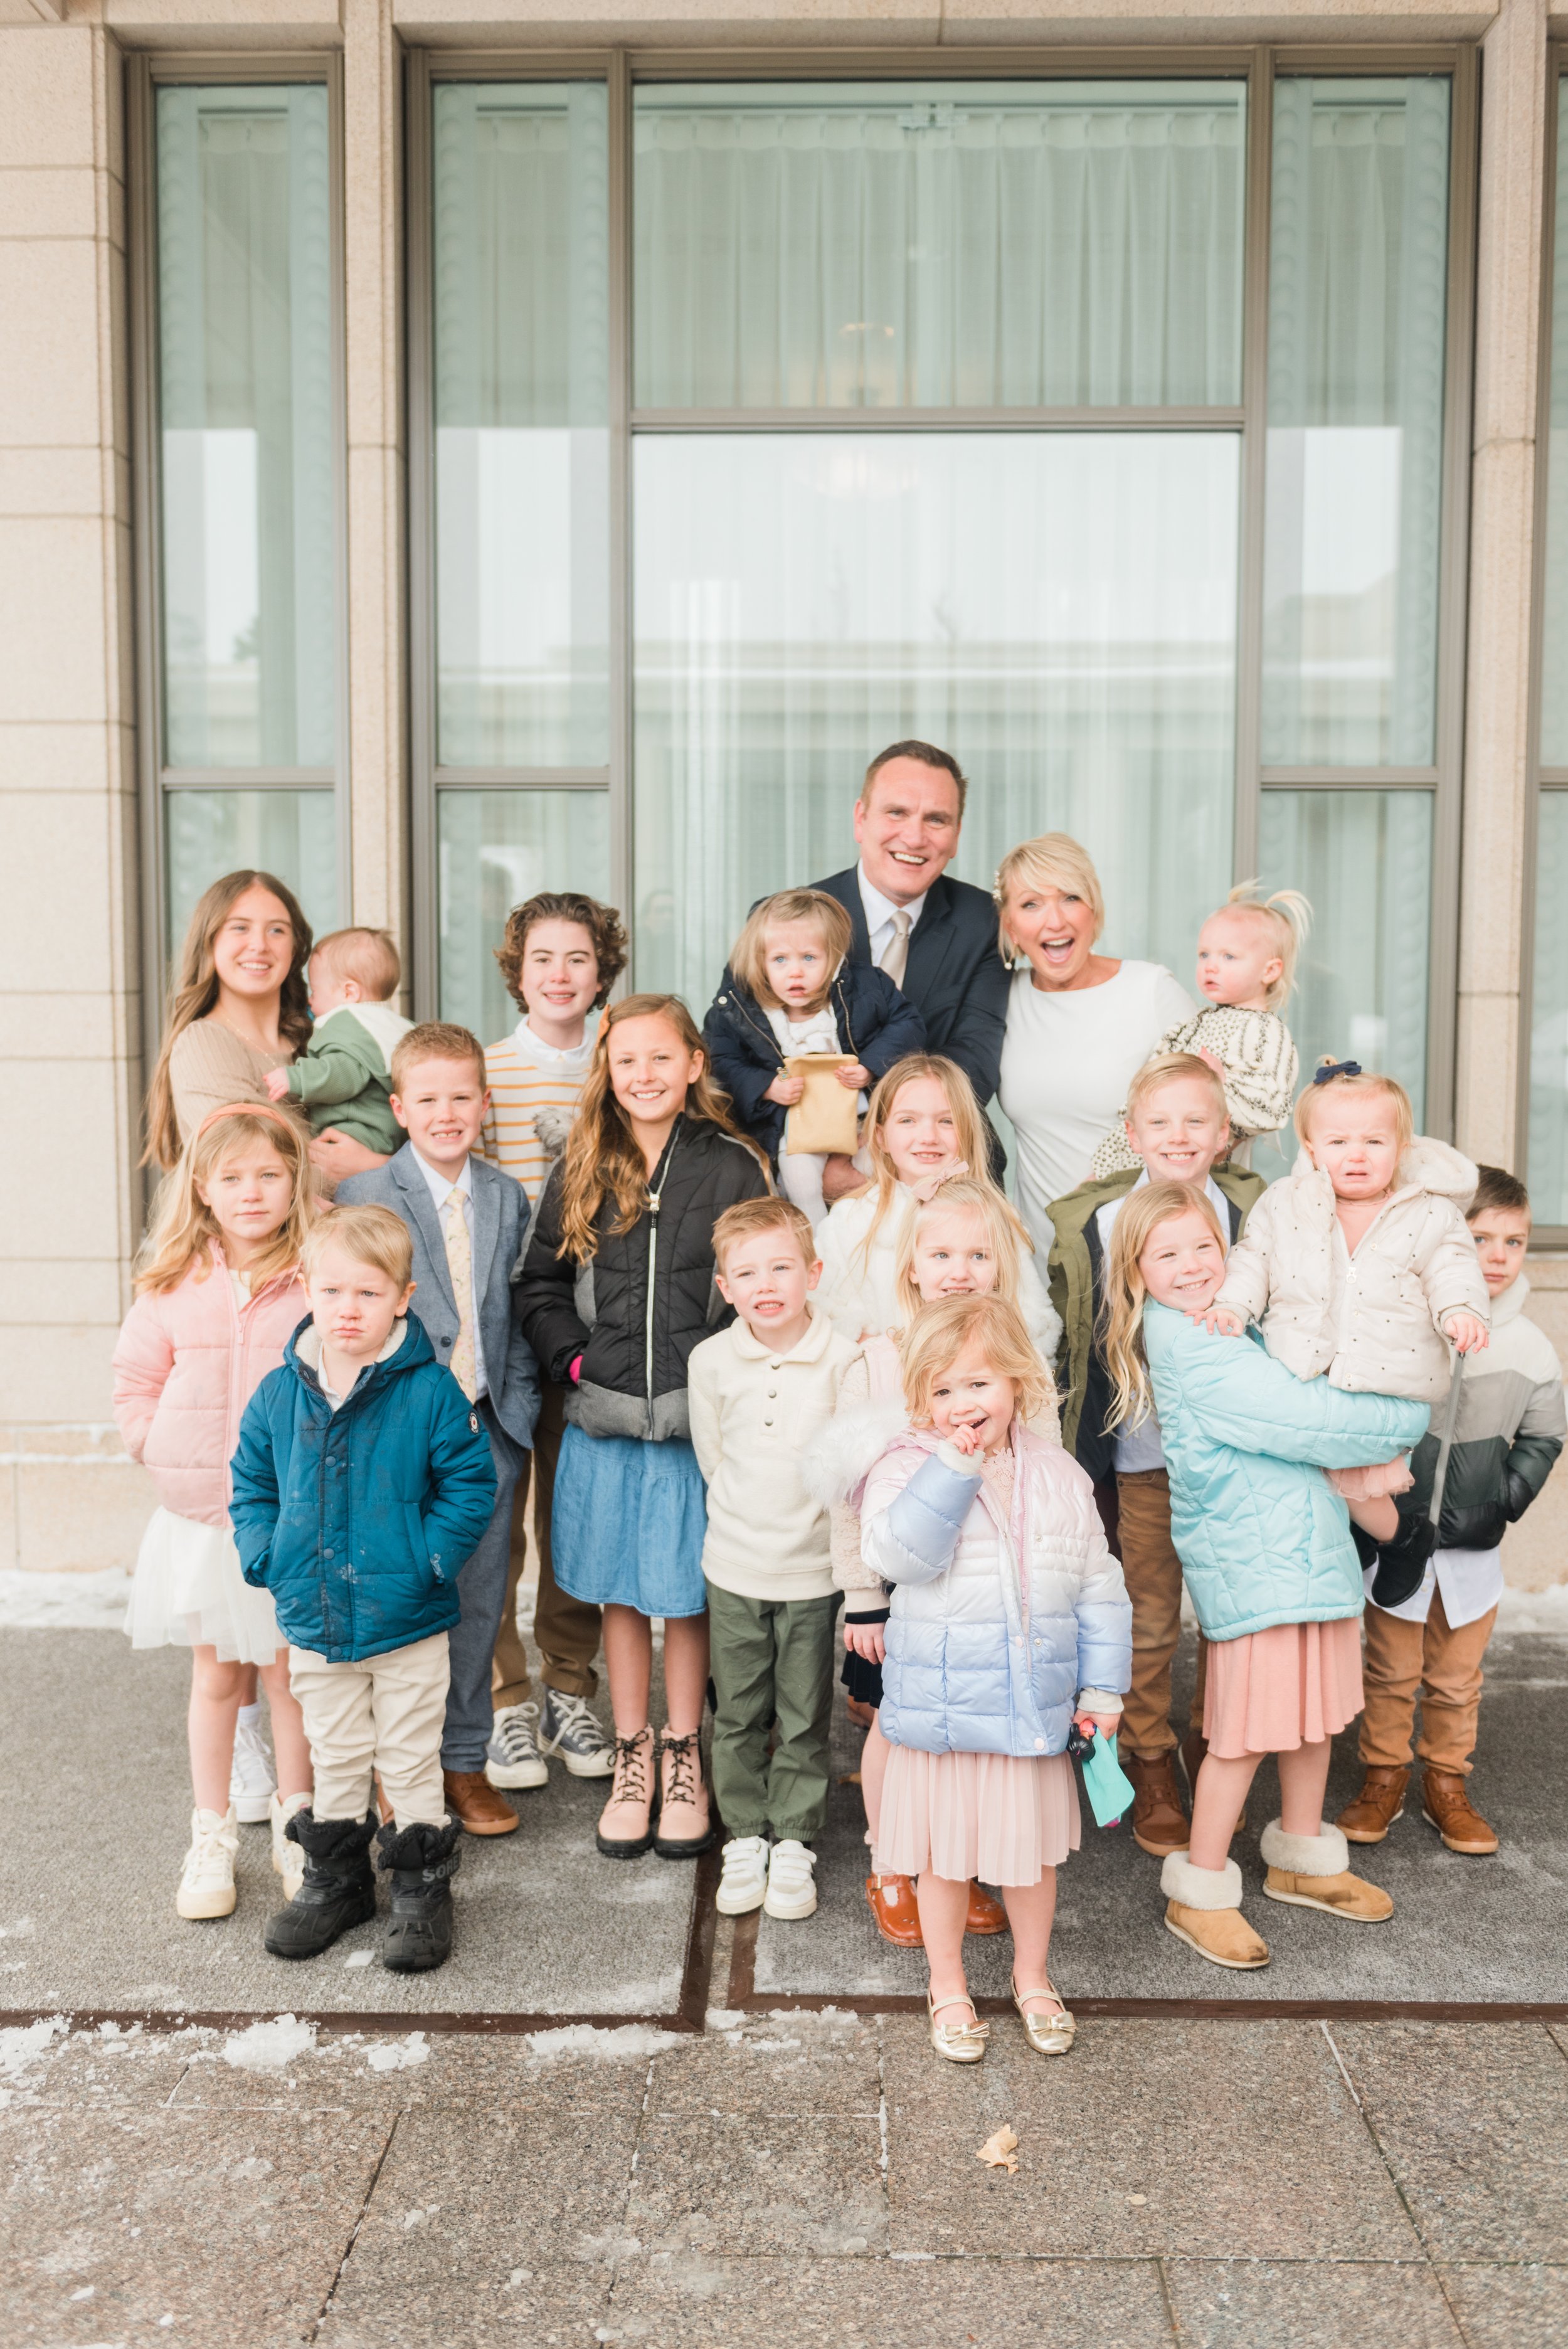  A bride and groom pose with their grandchildren in front of the Rexburg, ID LDS temple on their wedding day. Family wedding photos wedding photography timeline grandchildren photo #weddingphotographytimeline #stressfreeweddingday #ldswedding #photog